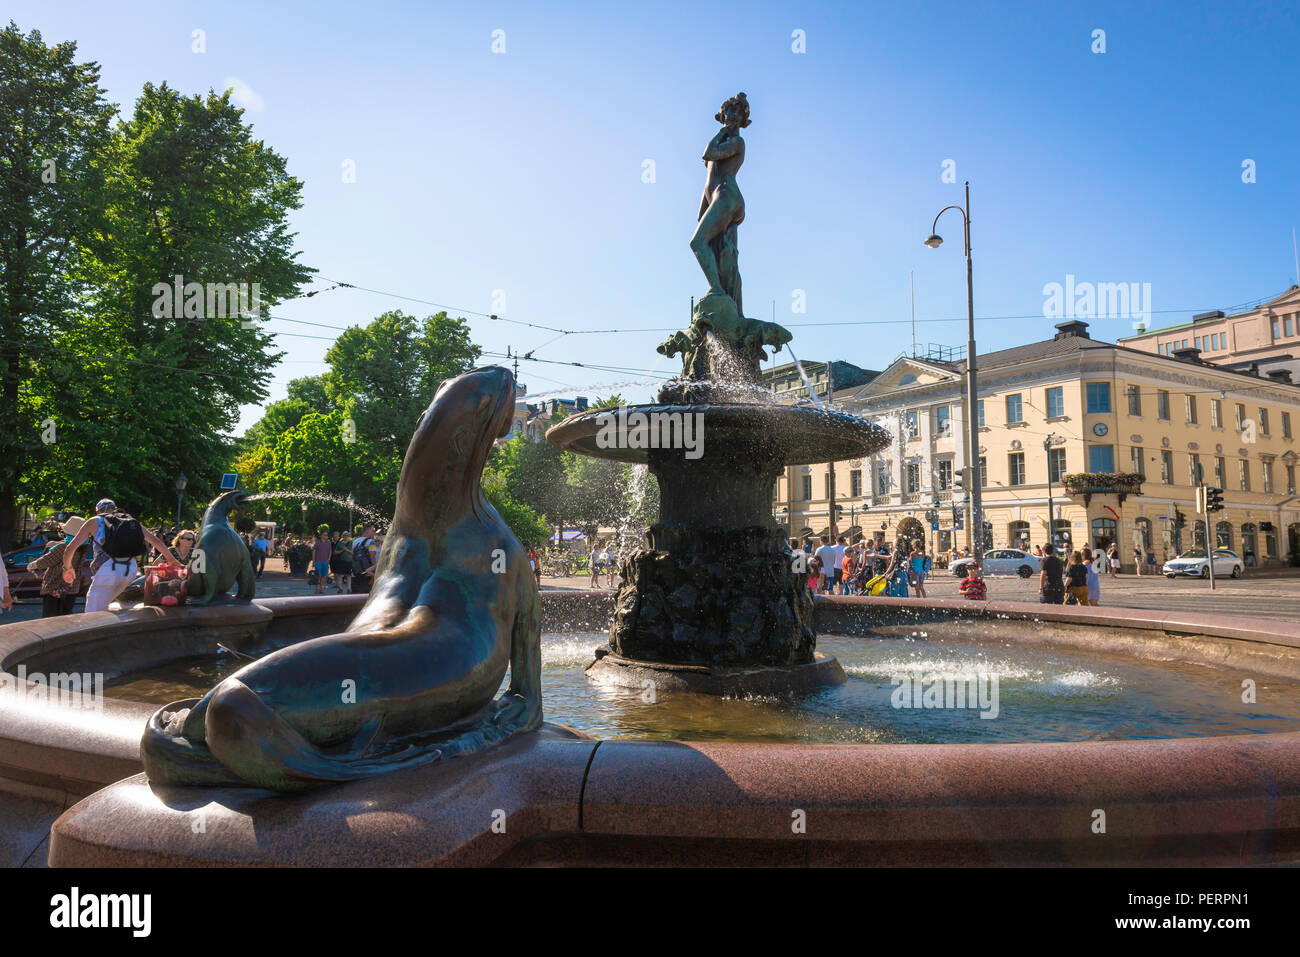 Helsinki fountain, view of the Havis Amanda fountain (1908) sited in the Market Square (Kauppatori) in the harbour area of Helsinki, Finland. Stock Photo